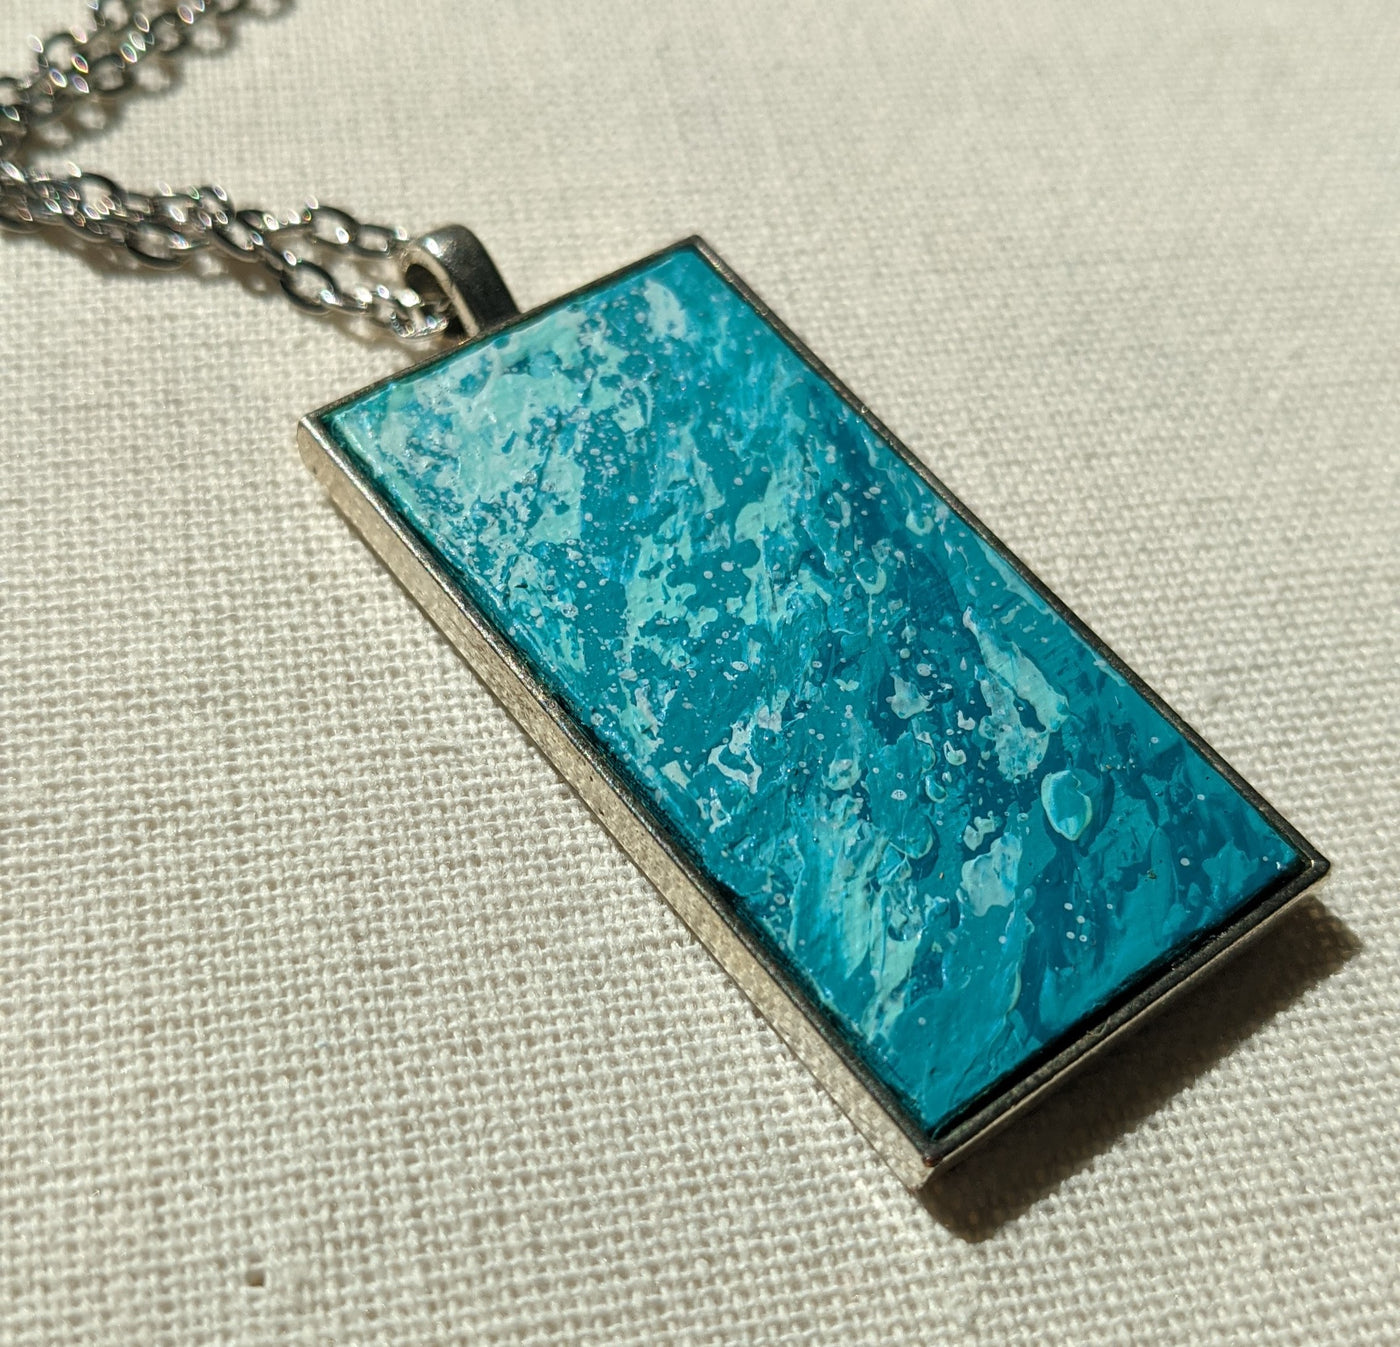 Long Hand-Painted Necklace | "Sea Foam" Abstract Art Pendant